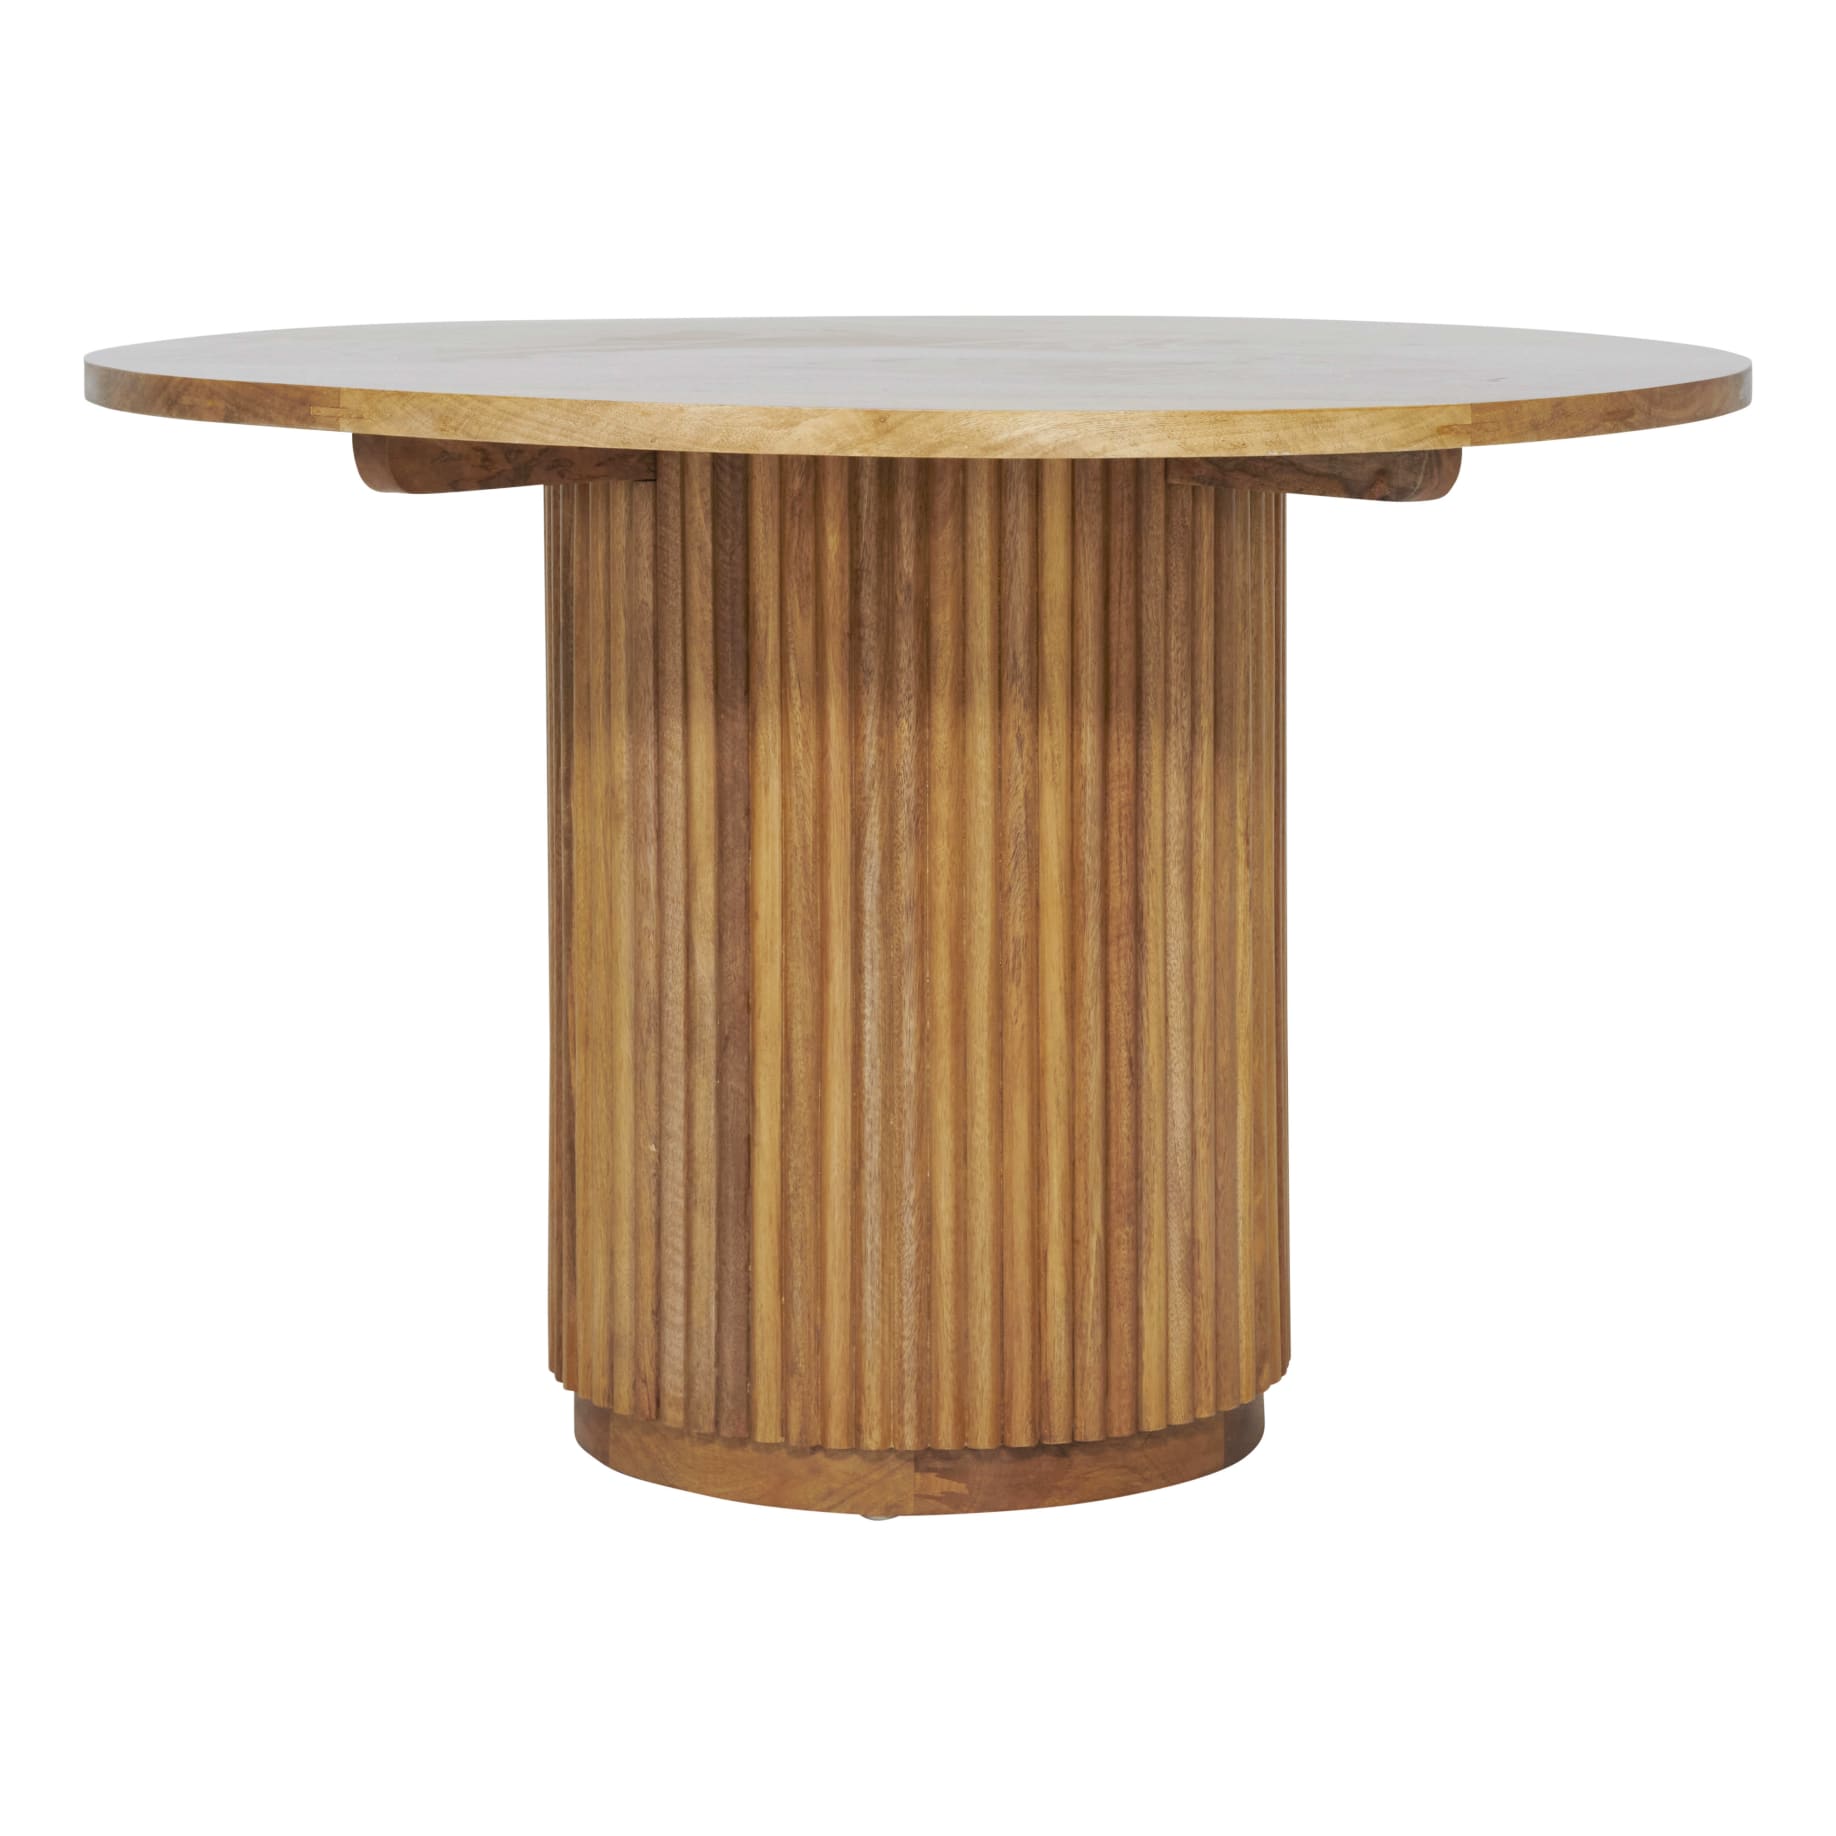 Porto Pablo Round Dining Table 135cm in Rustic Clear Lacquer